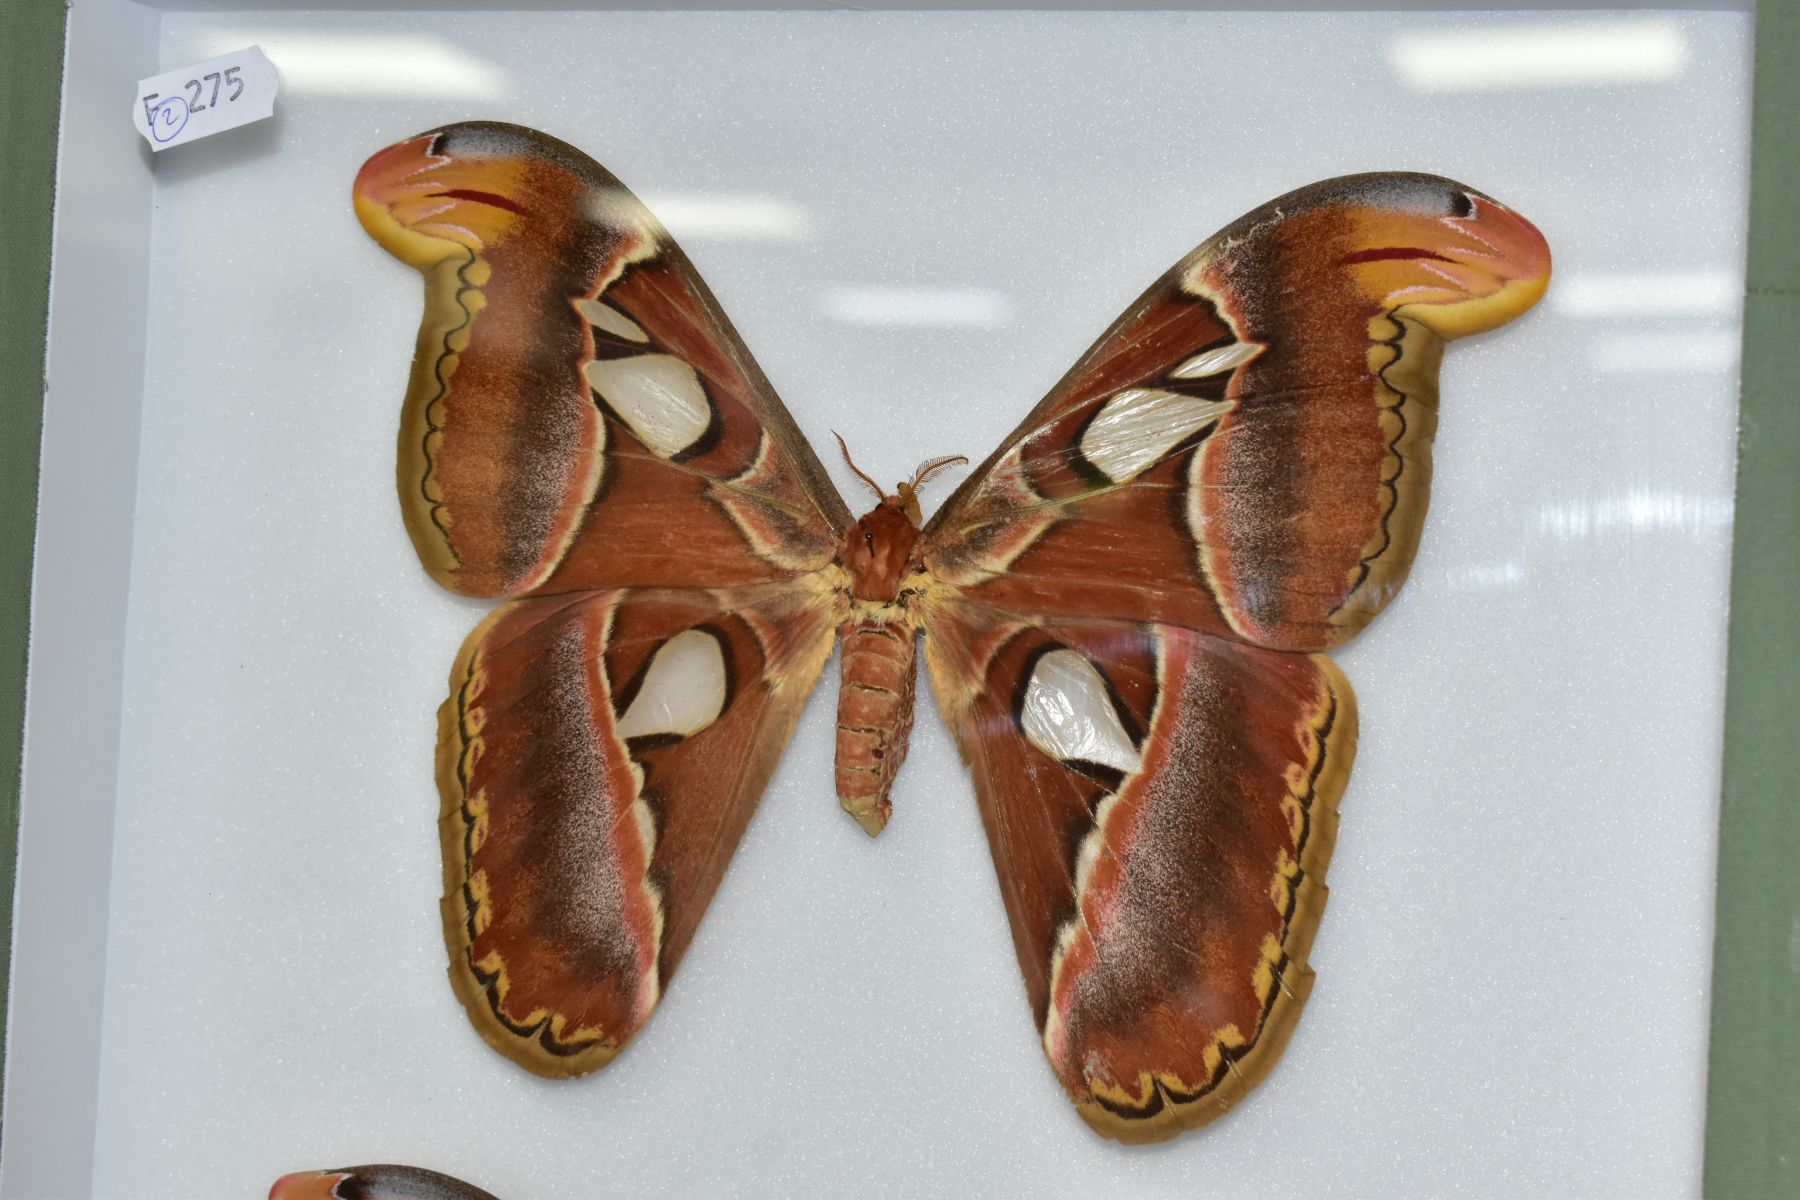 ENTOMOLOGY: A CASED DISPLAY OF ATLAS MOTHS, a pale green wall hanging display case with glass front, - Image 2 of 3